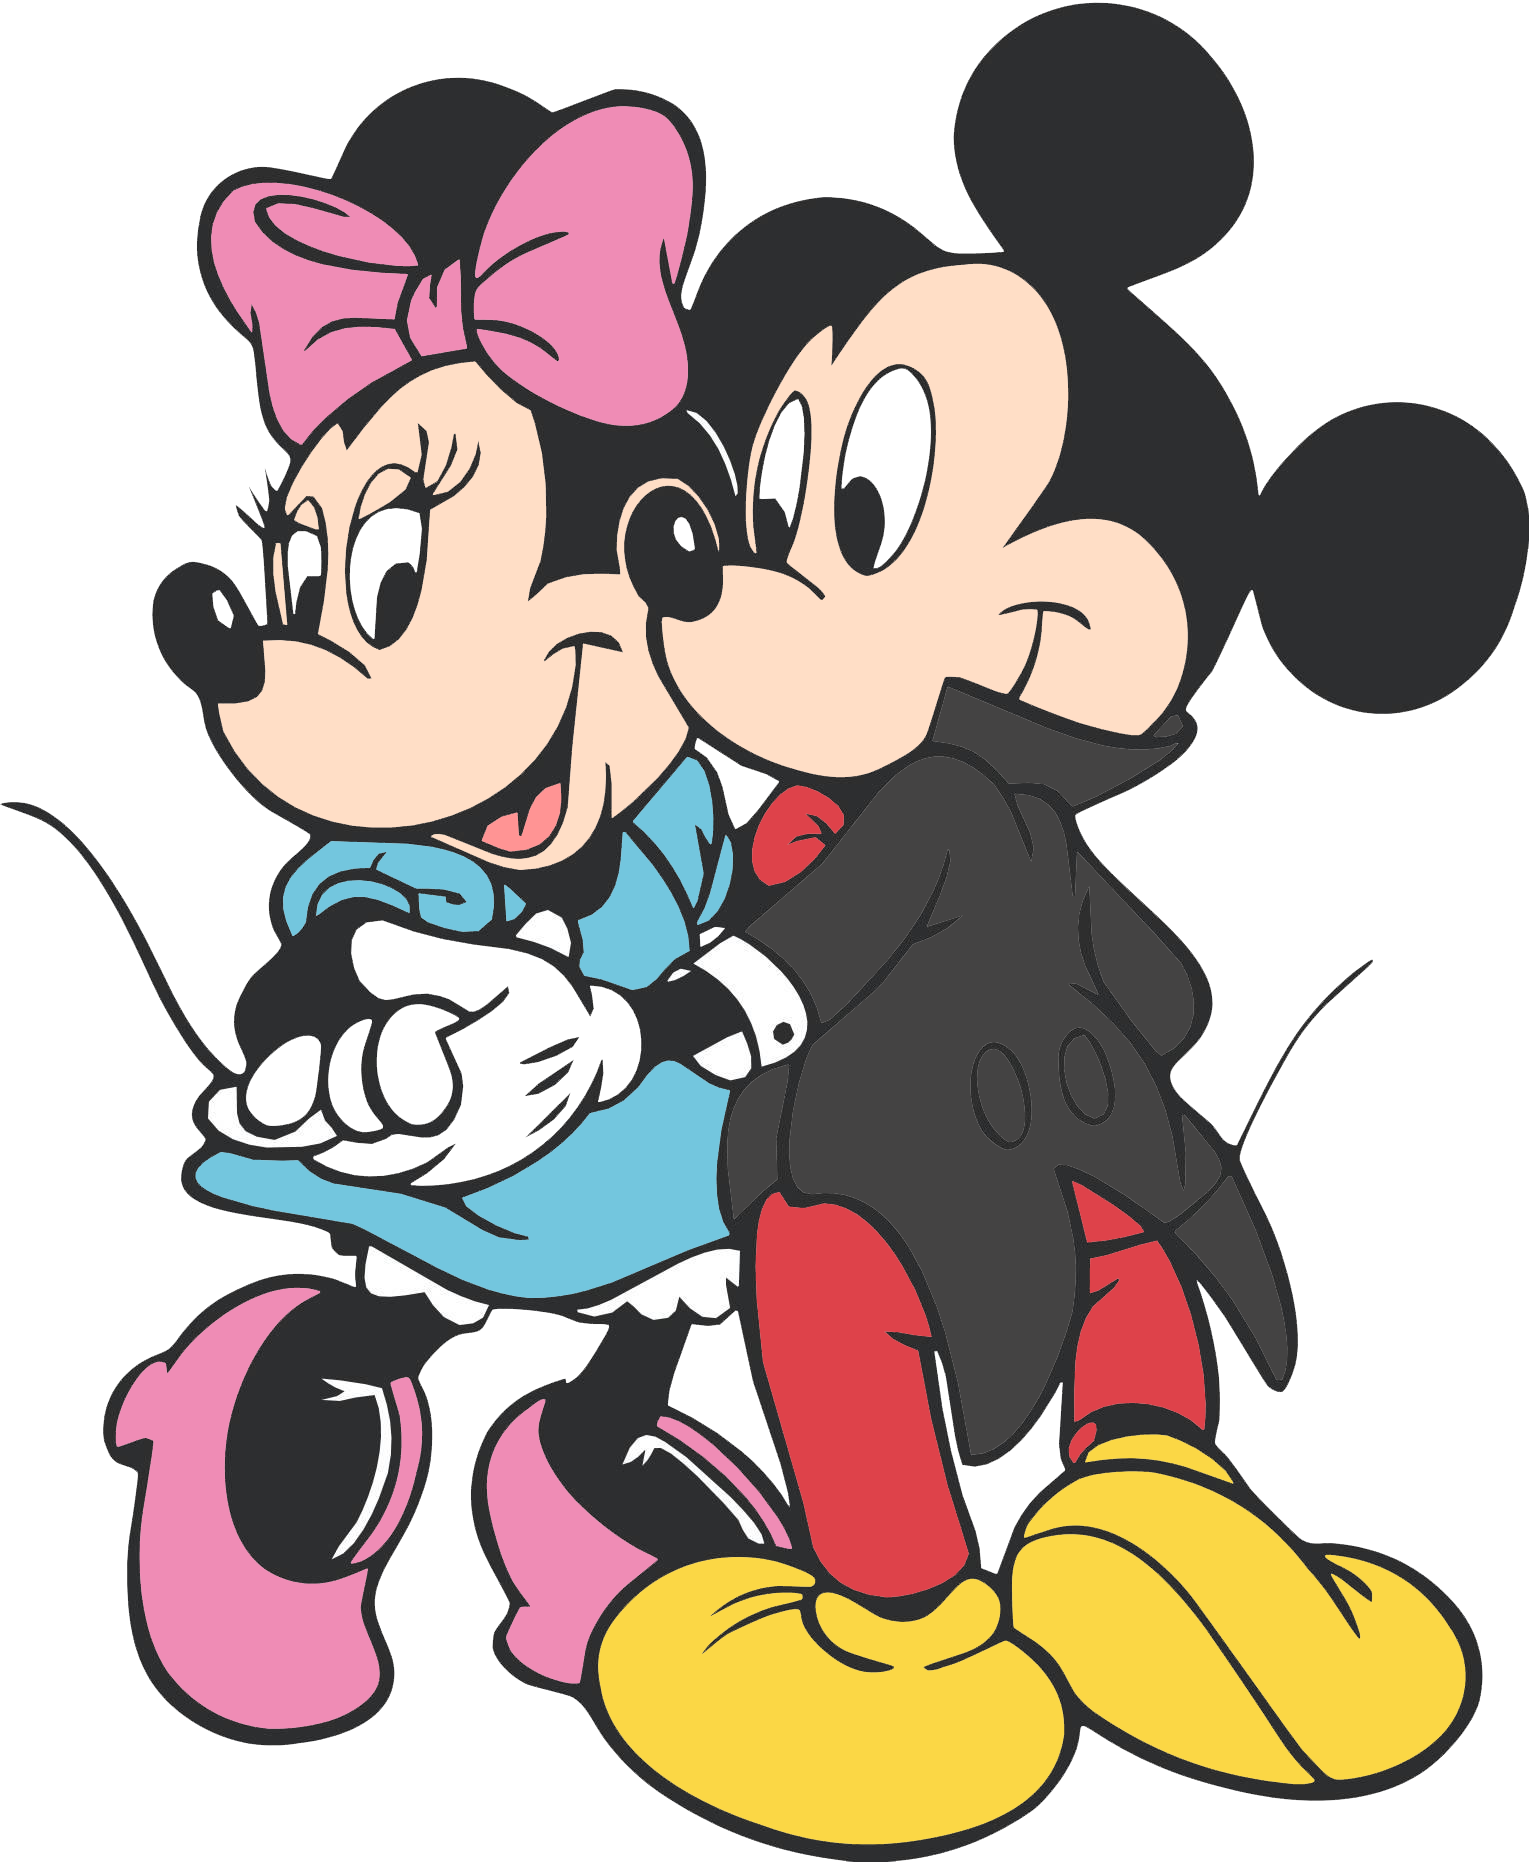 Baby Minnie Mouse Clip Art   Clipart Panda   Free Clipart Images